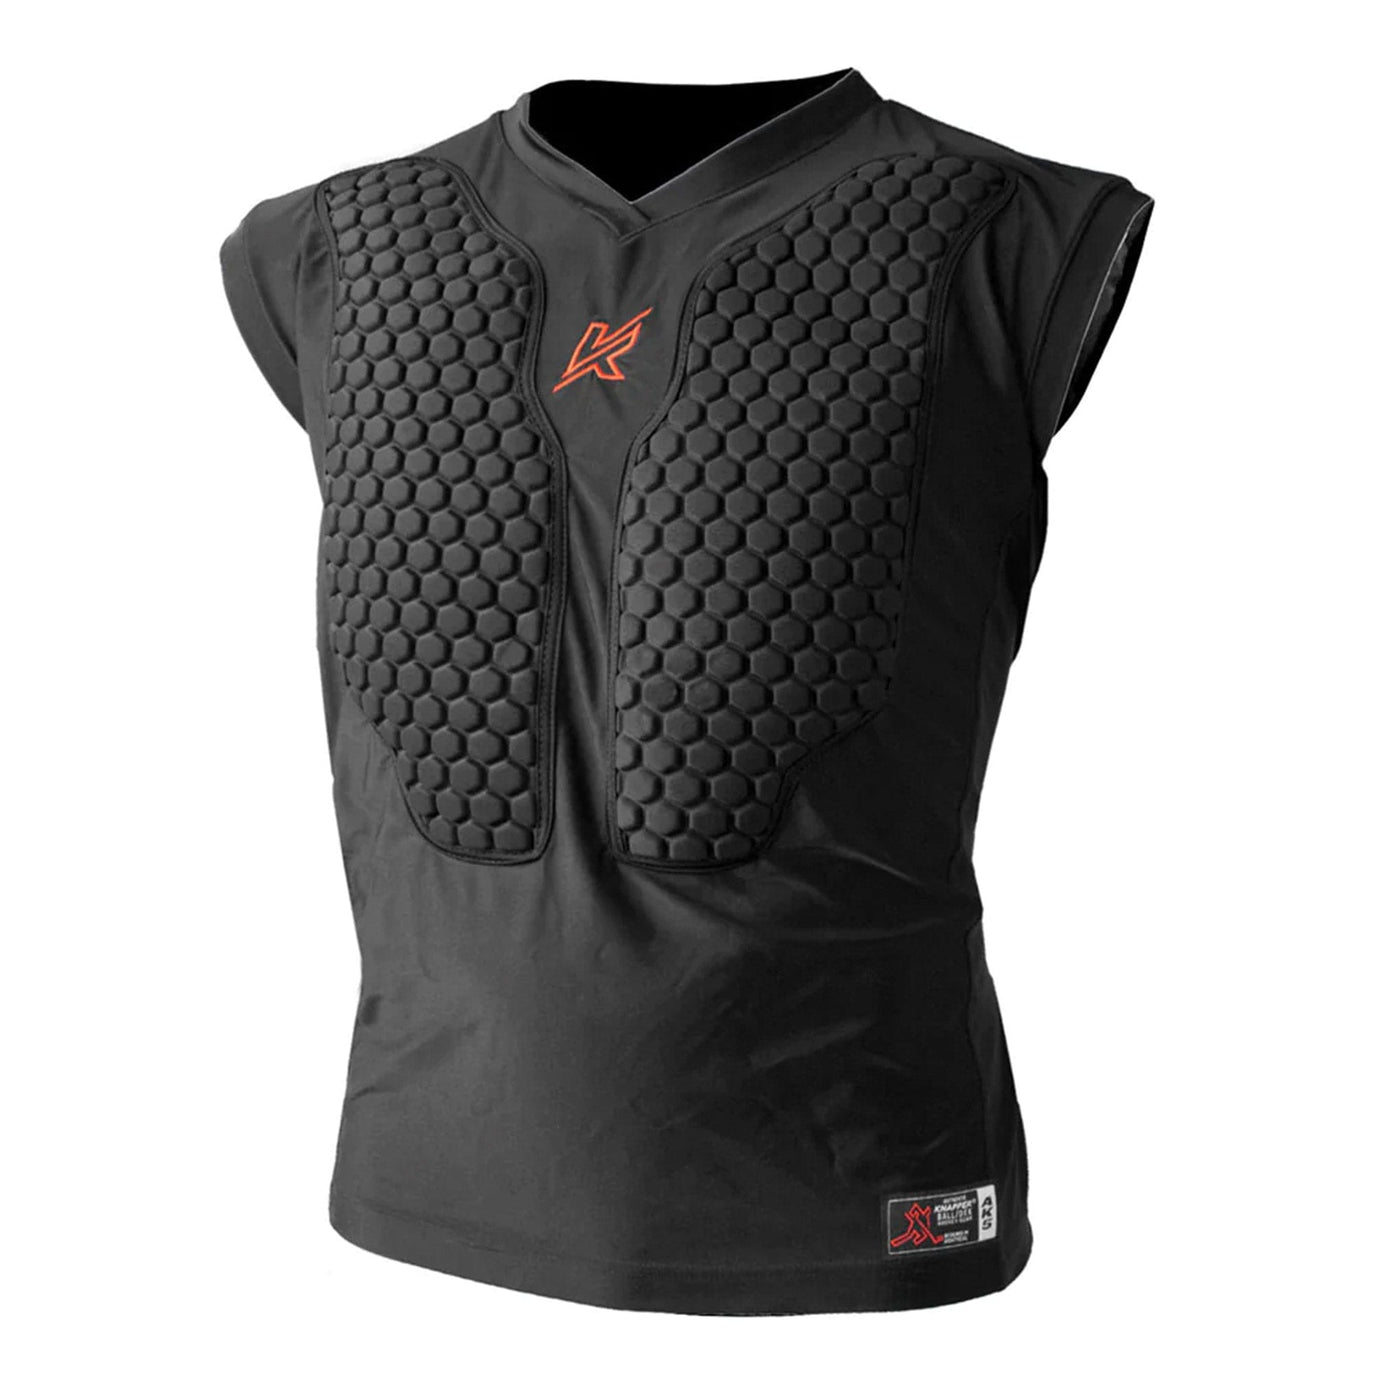 Knapper AK5 Padded Shirt - The Hockey Shop Source For Sports